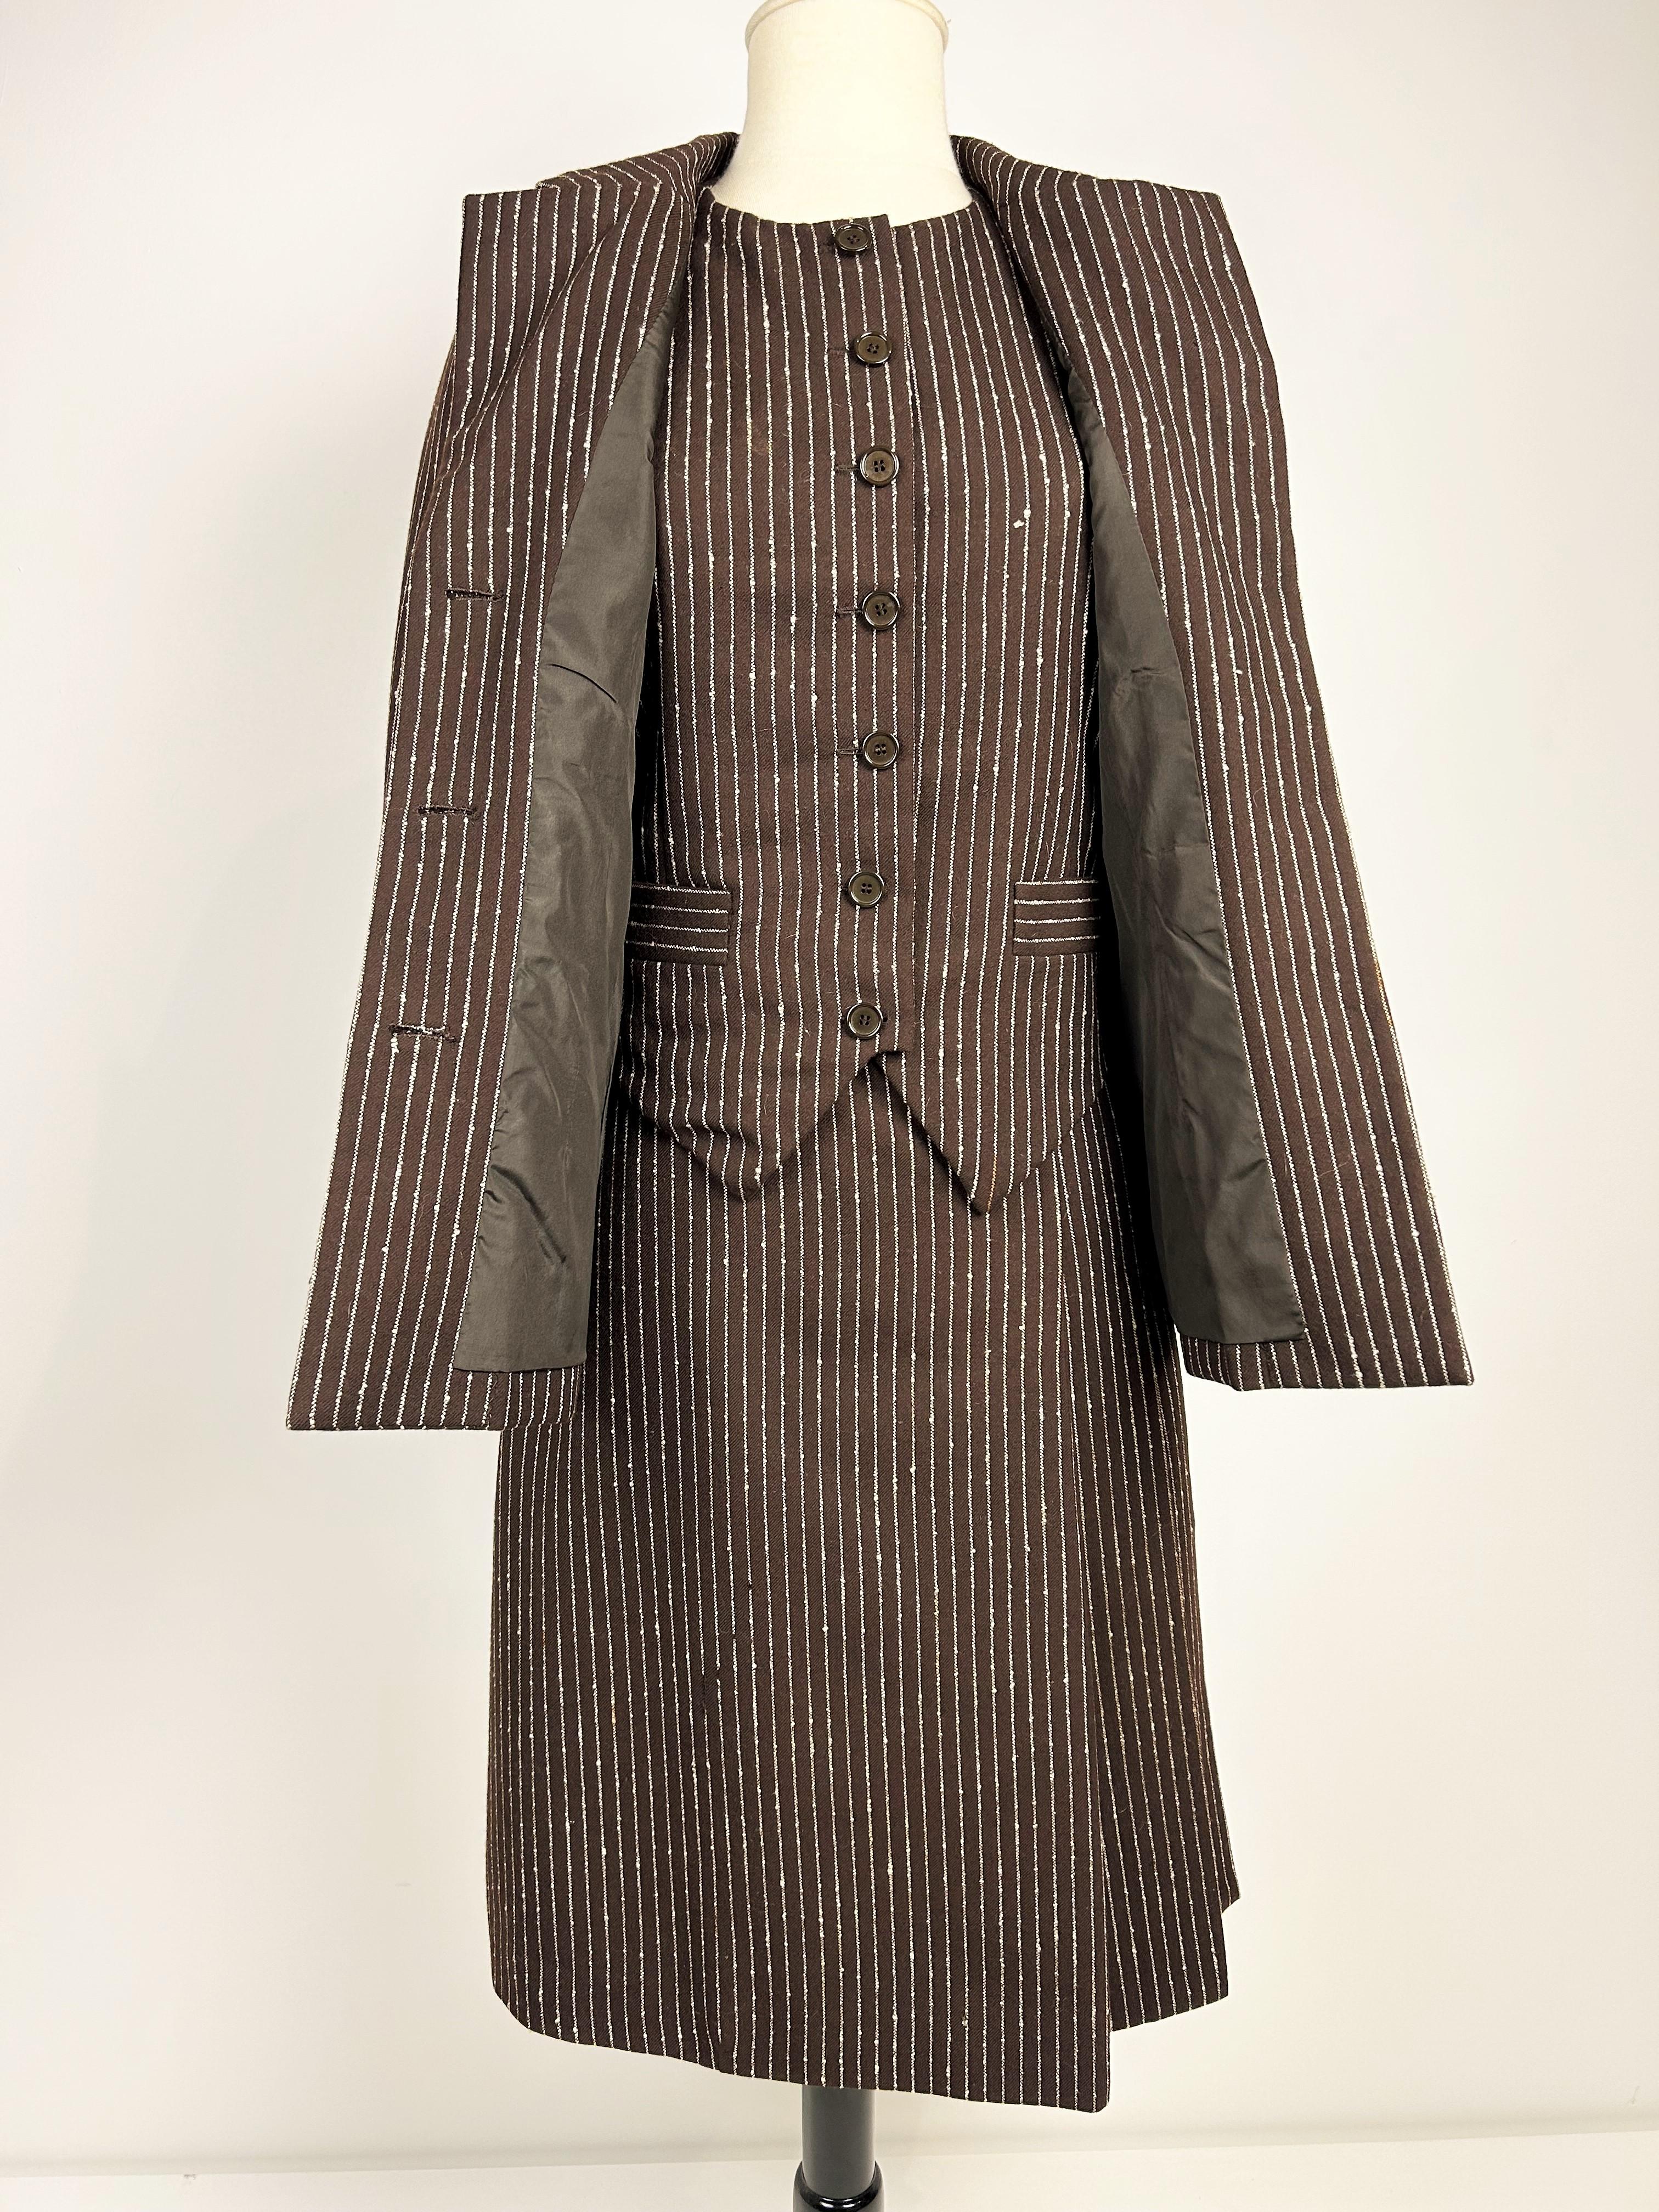 Yves Saint Laurent Haute Couture skirt-suit numbered 14539 Circa 1967/1970 For Sale 13